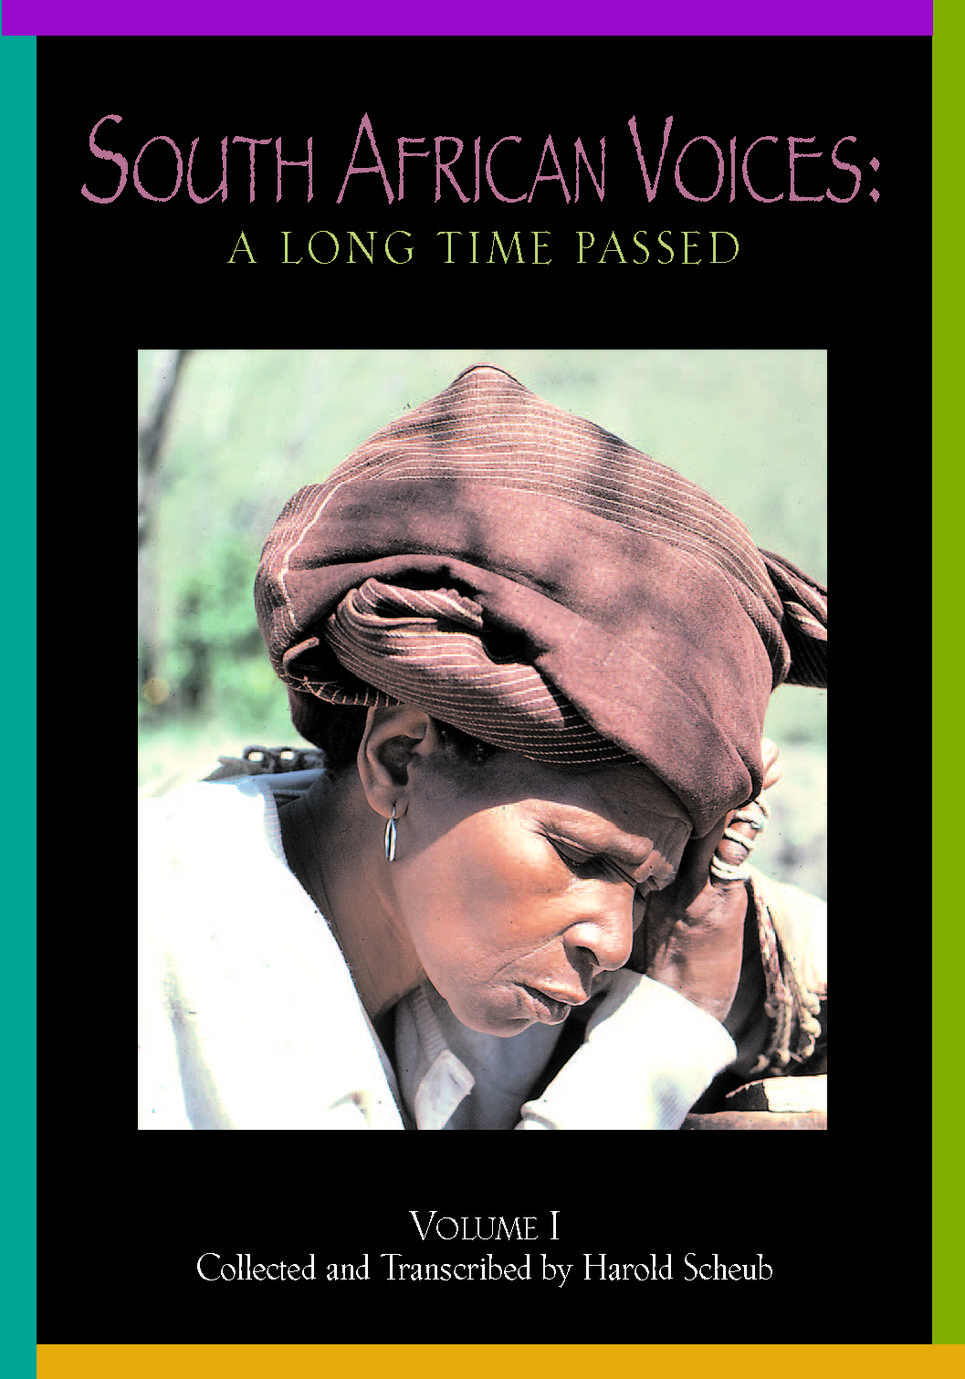 Cover image: South African Voices: A Long Time Passed. Volume I. Collected and Transcribed by Harold Scheub.